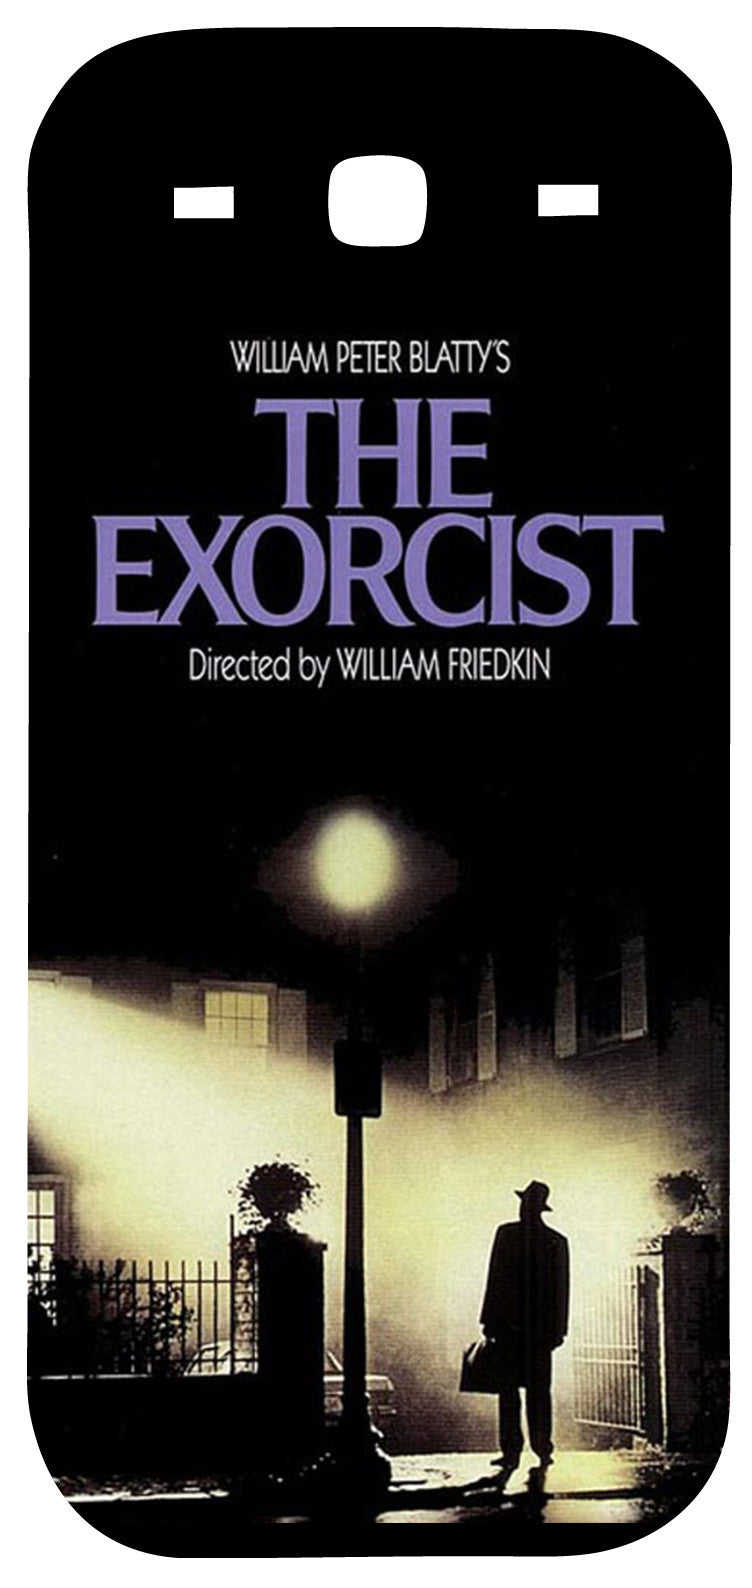 The Exorcist S3 Phone Case